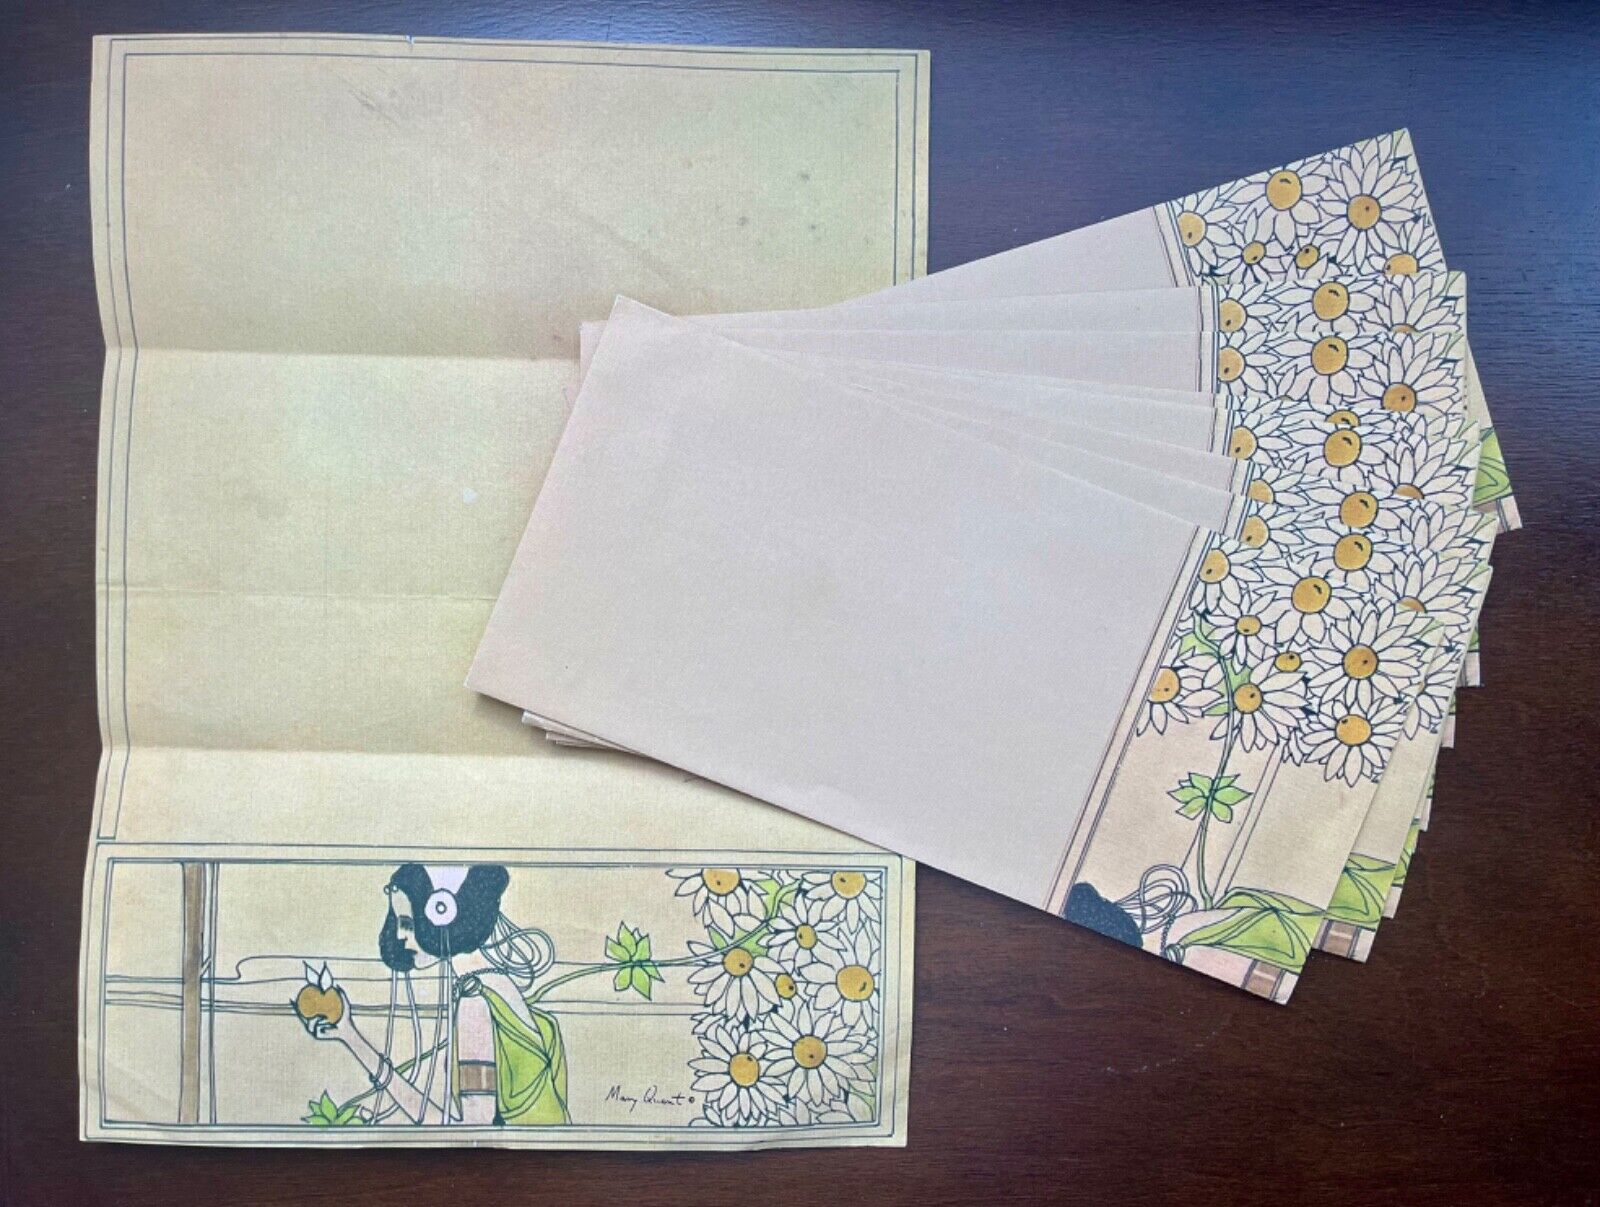 Rare vintage mid-century Mary Quant art nouveau-inspired stationery envelopes